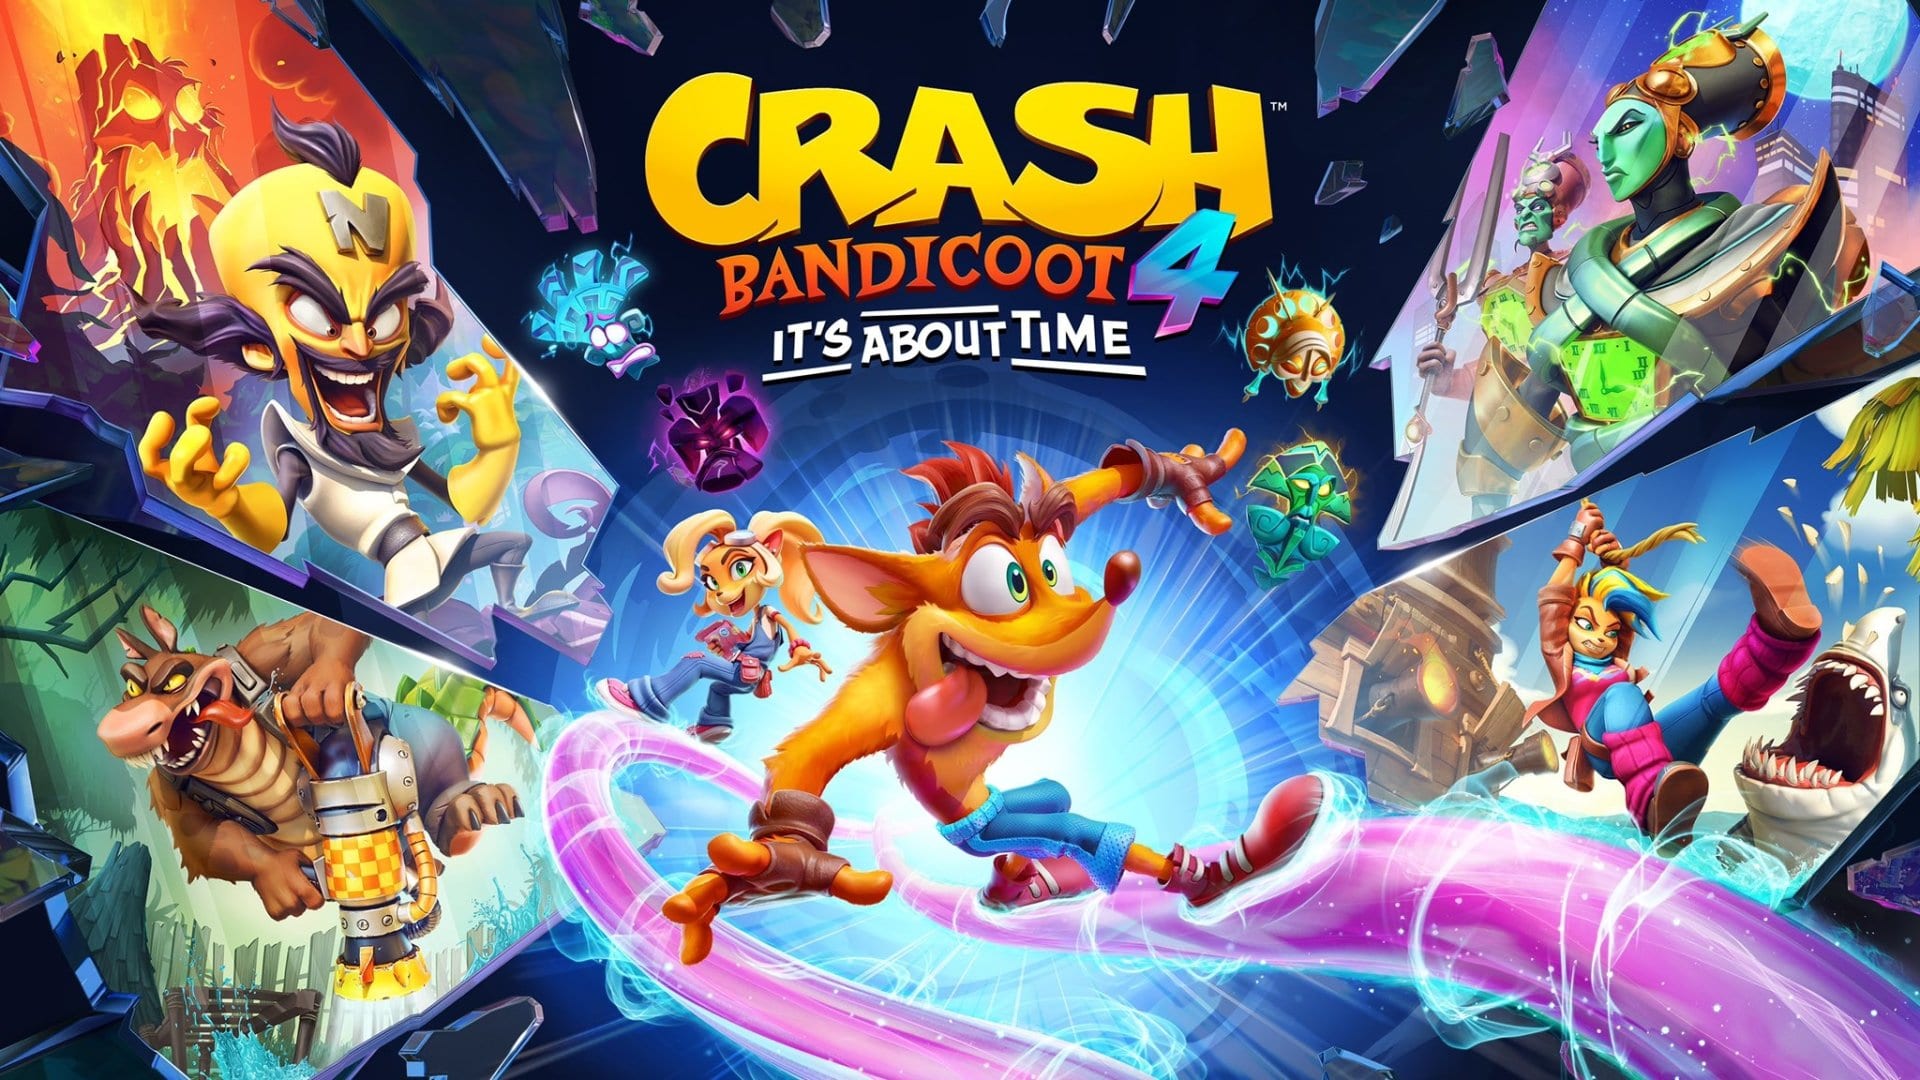 Crash Bandicoot 4: It's About Time Game Review + Gameplay